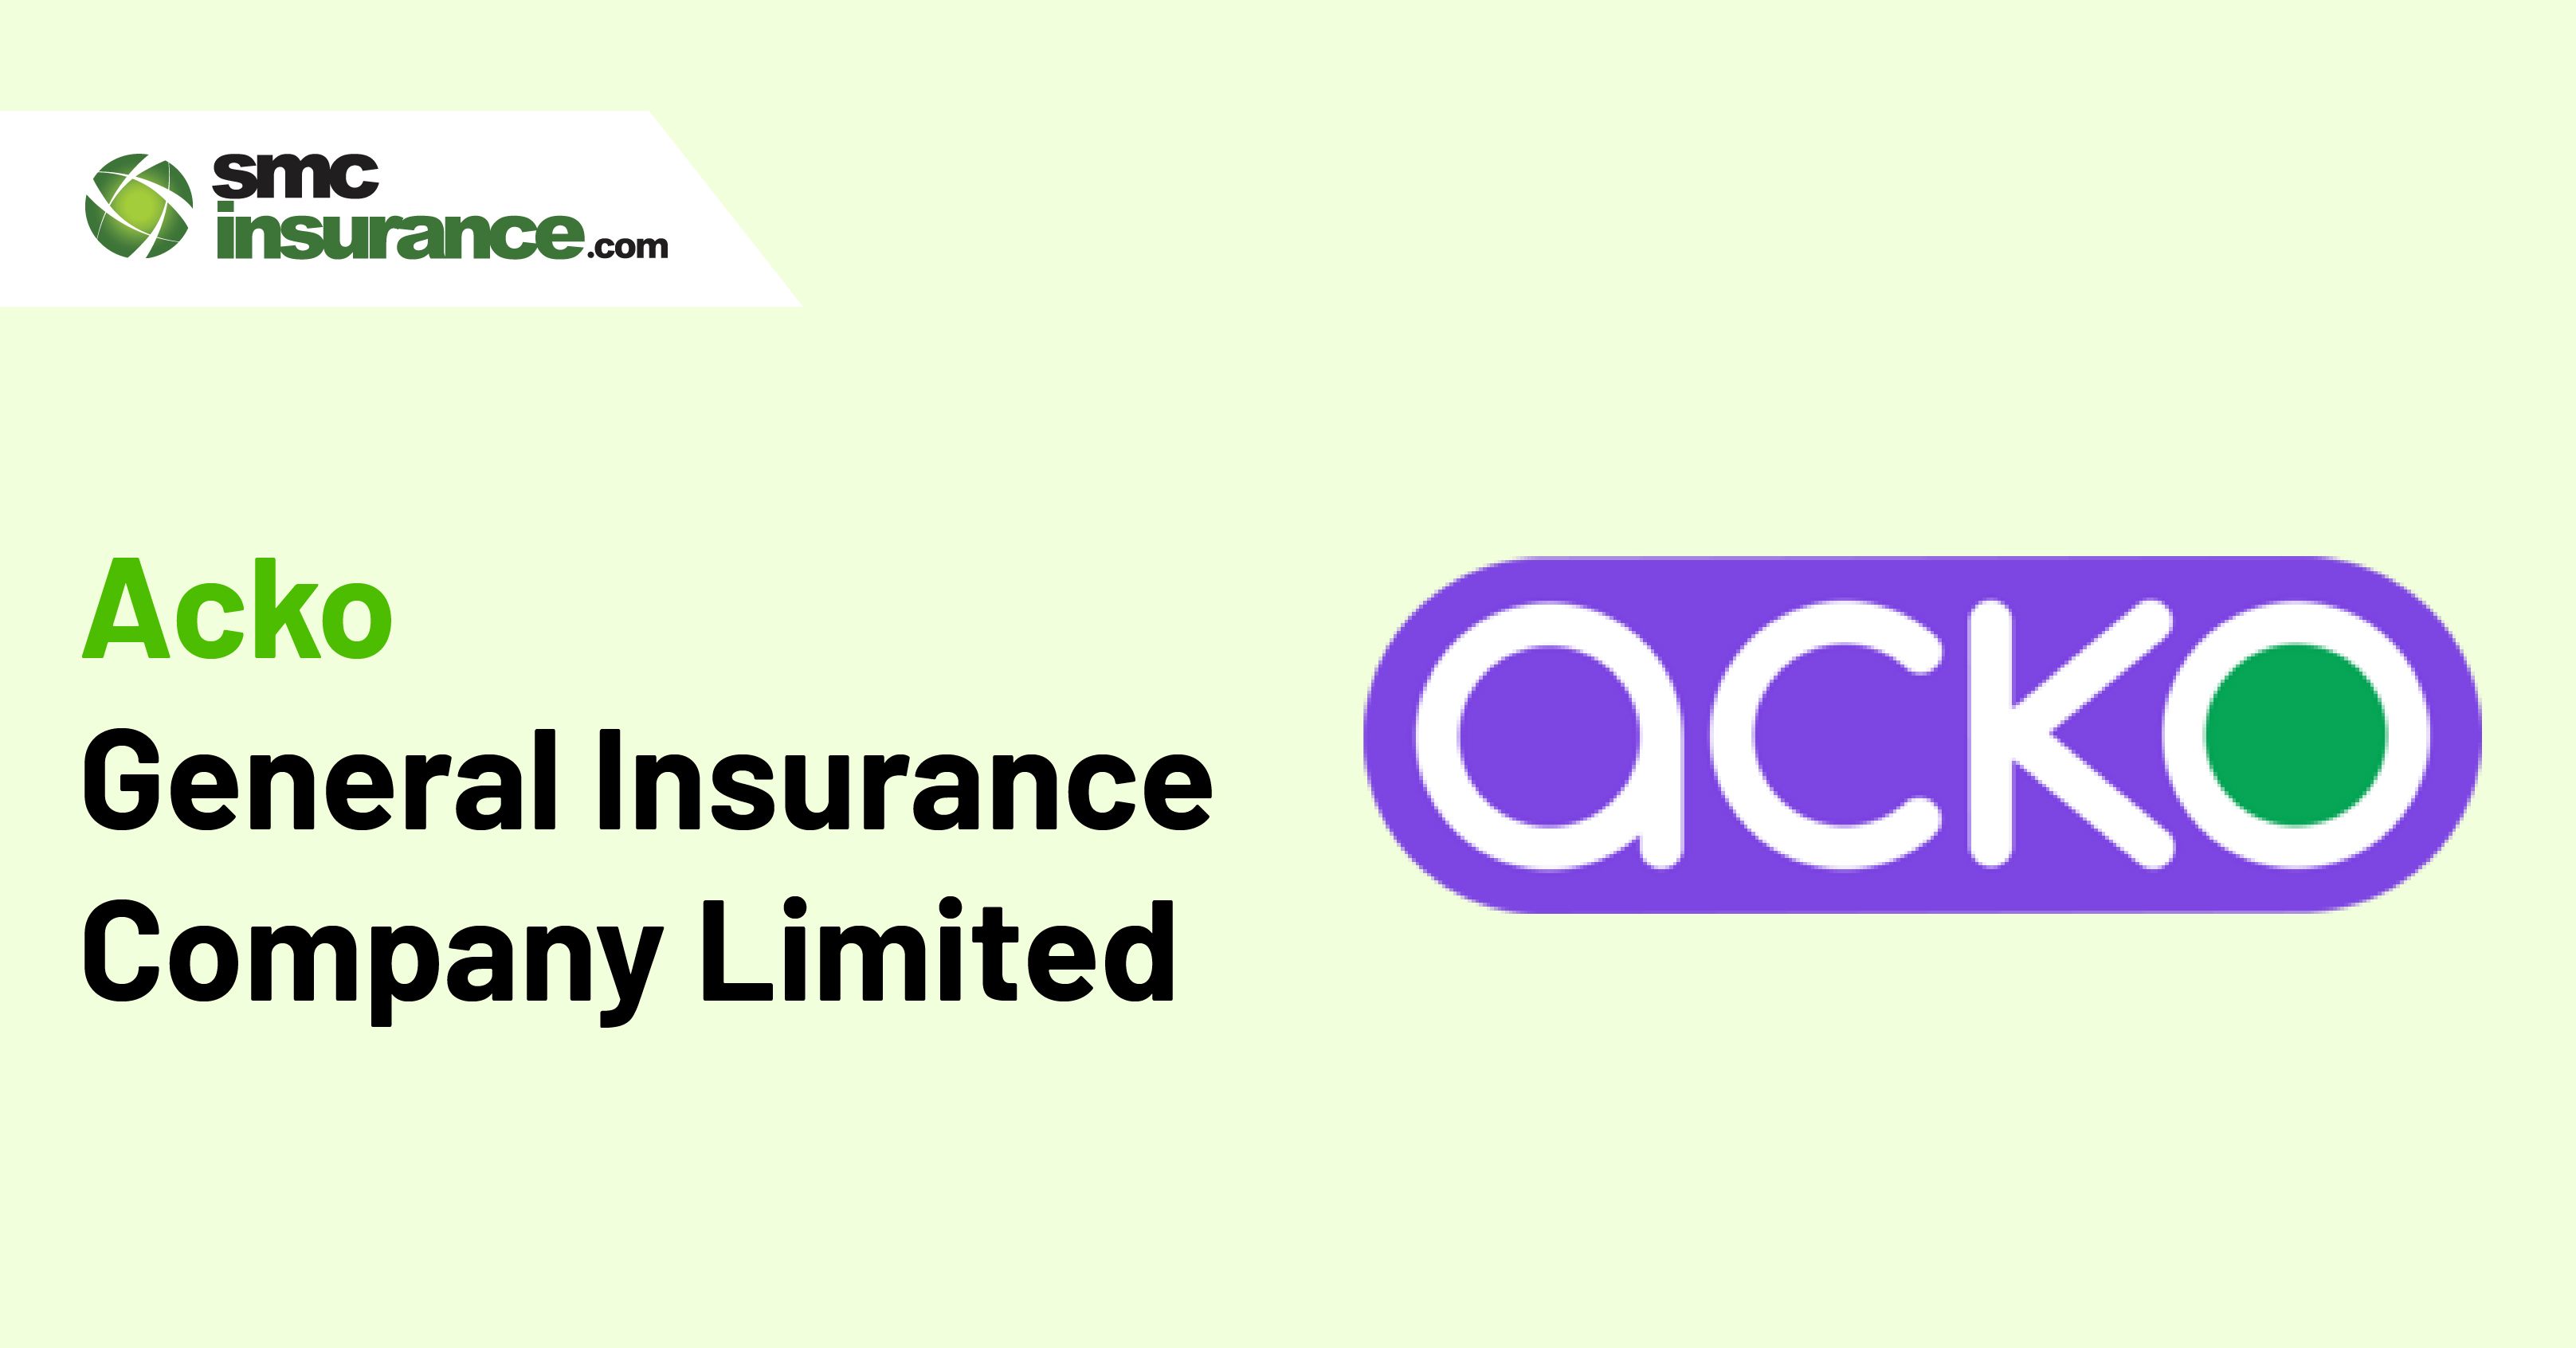 Acko General Insurance Company Limited